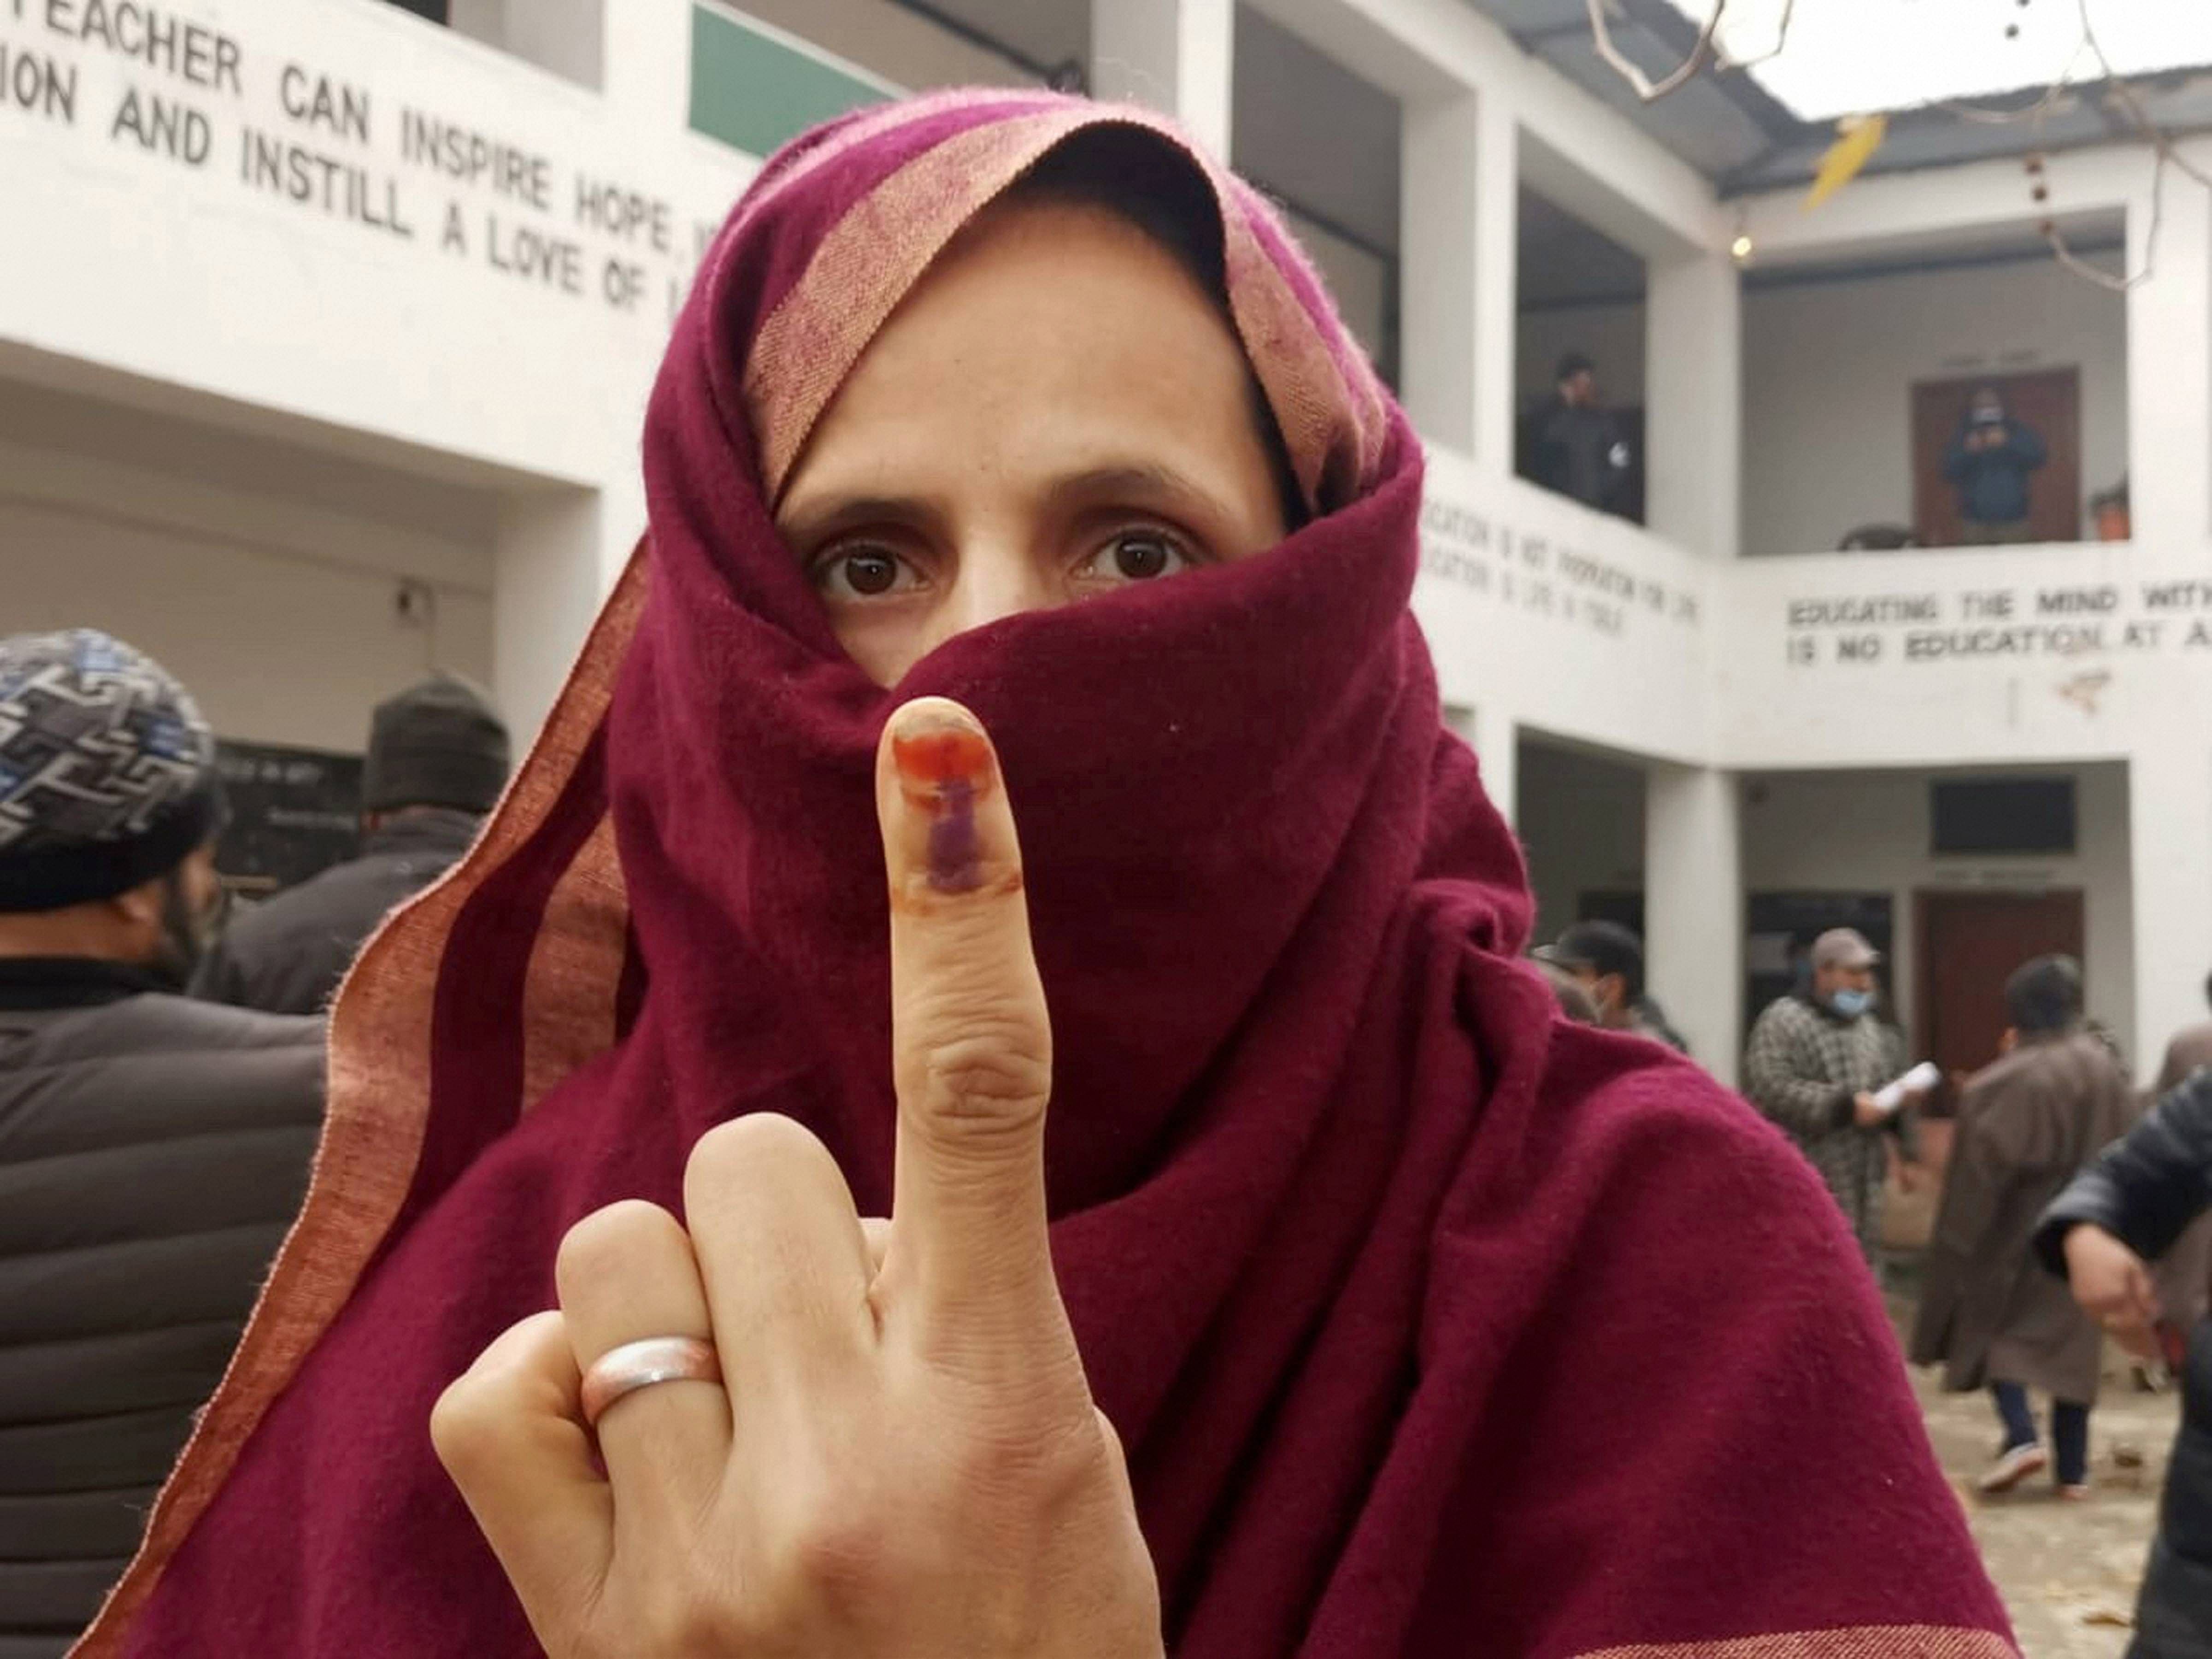 A woman shows her ink-marked finger after casting her vote during the third phase of DDC elections, at a polling station in Ganderbal area of Central Kashmir, Friday, Dec. 4, 2020. Credit: PTI Photo